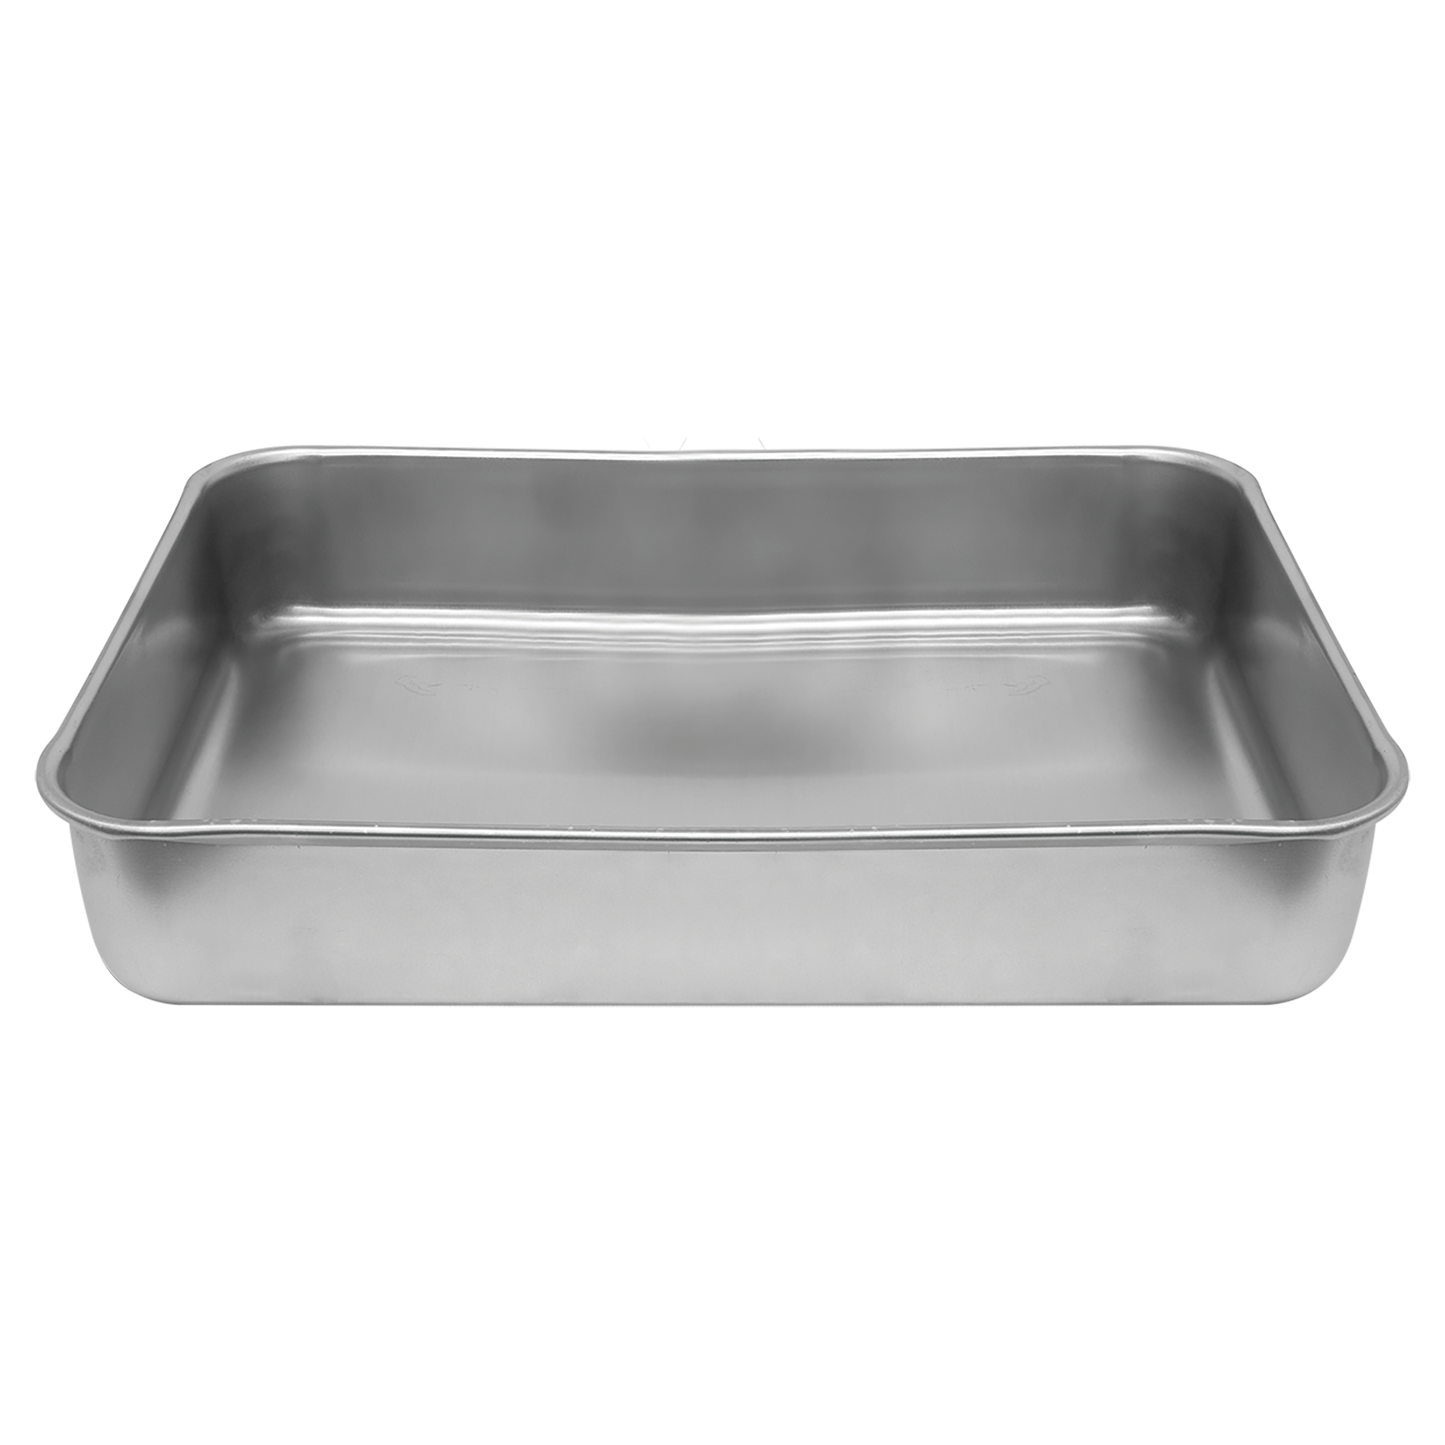 Replacement Pan for "9x13 Aluminum Cake Pan with Personalized, Powder-Coated Lid"